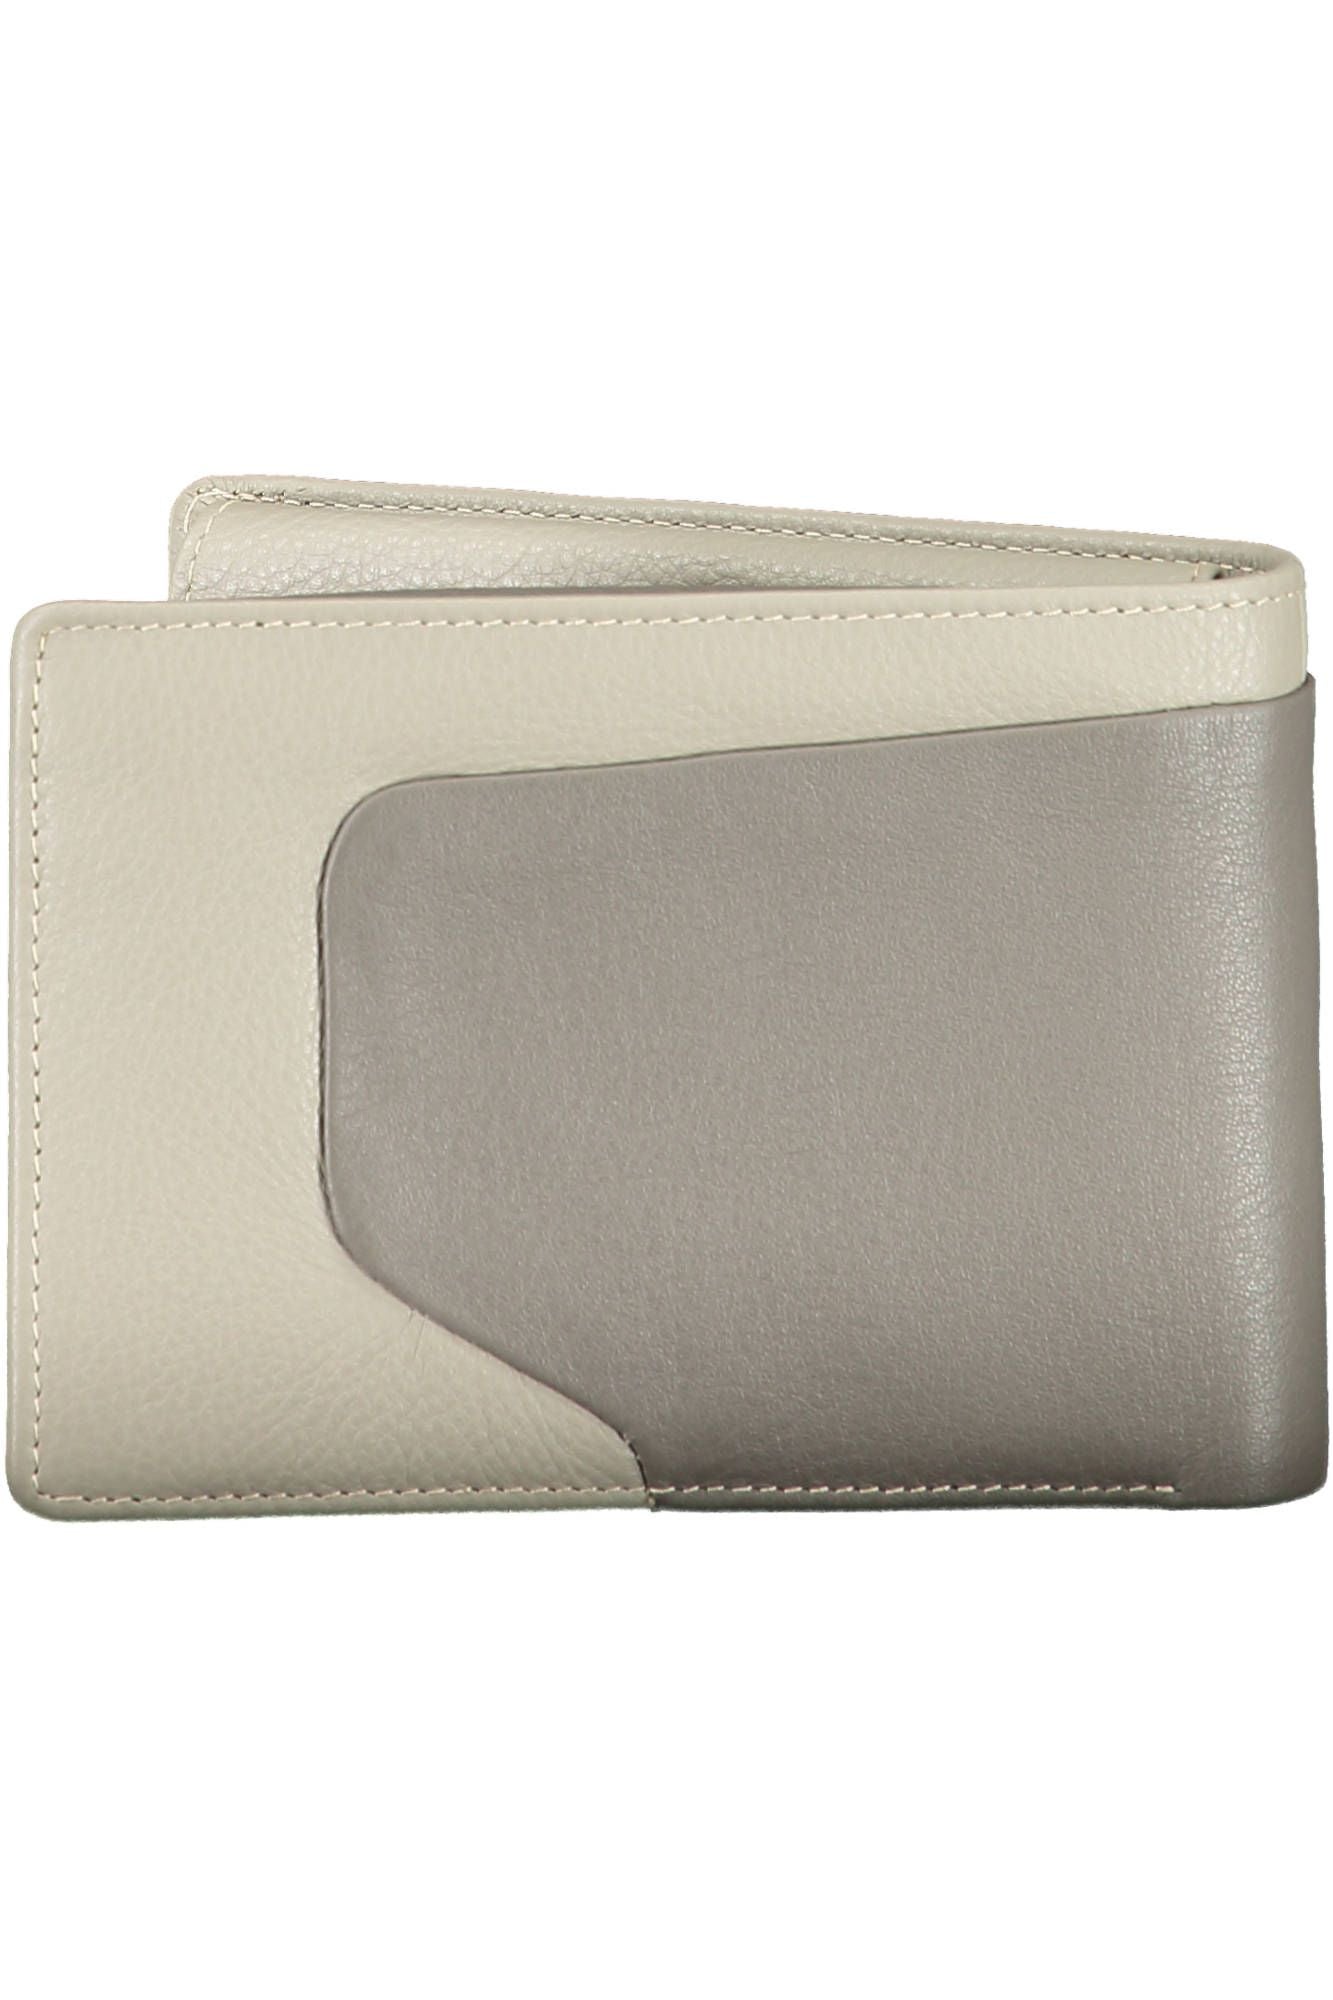 Elegant Gray Leather RFID Wallet with Coin Purse